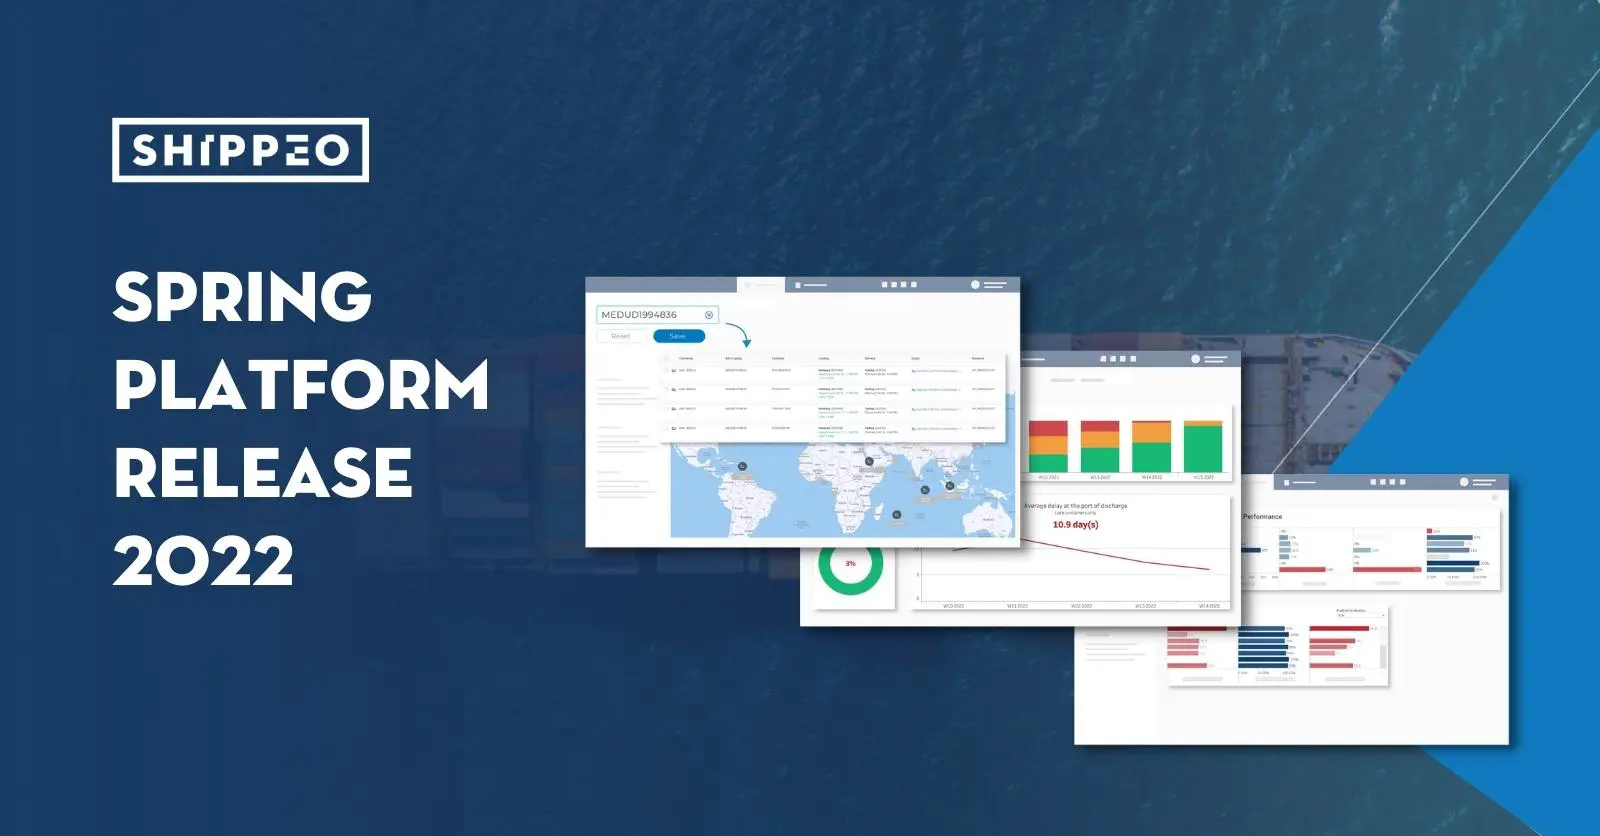 Shippeo introduces Carbon Visibility and brings powerful new features to Ocean and Road Visibility